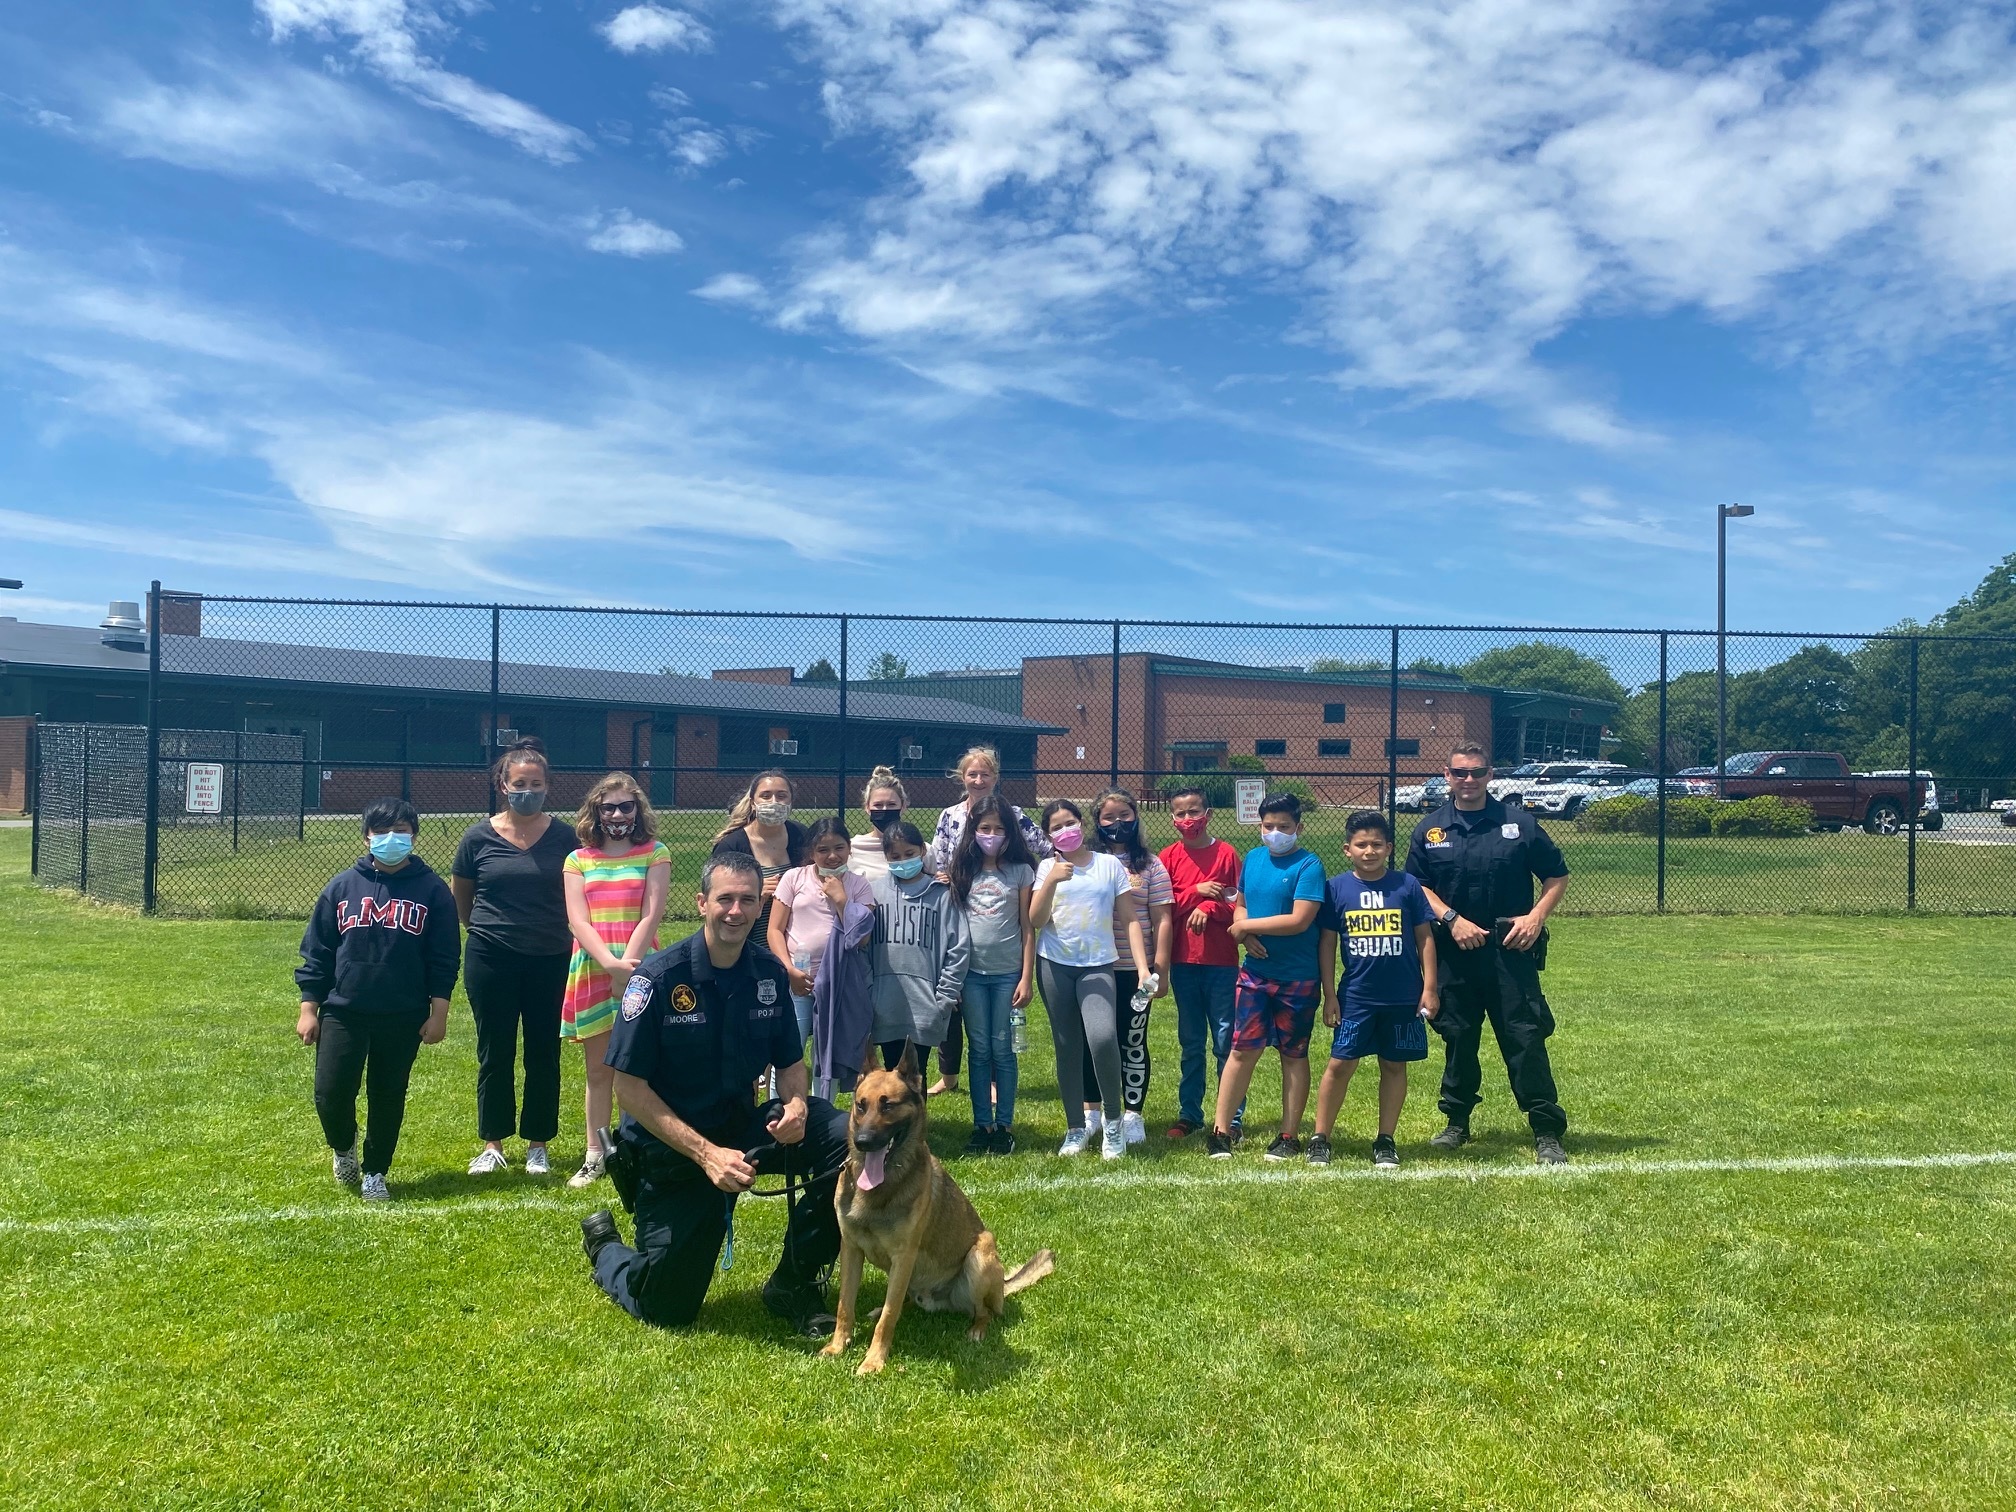 Southampton Intermediate School students learned about K-9s during a recent visit from local police officers.